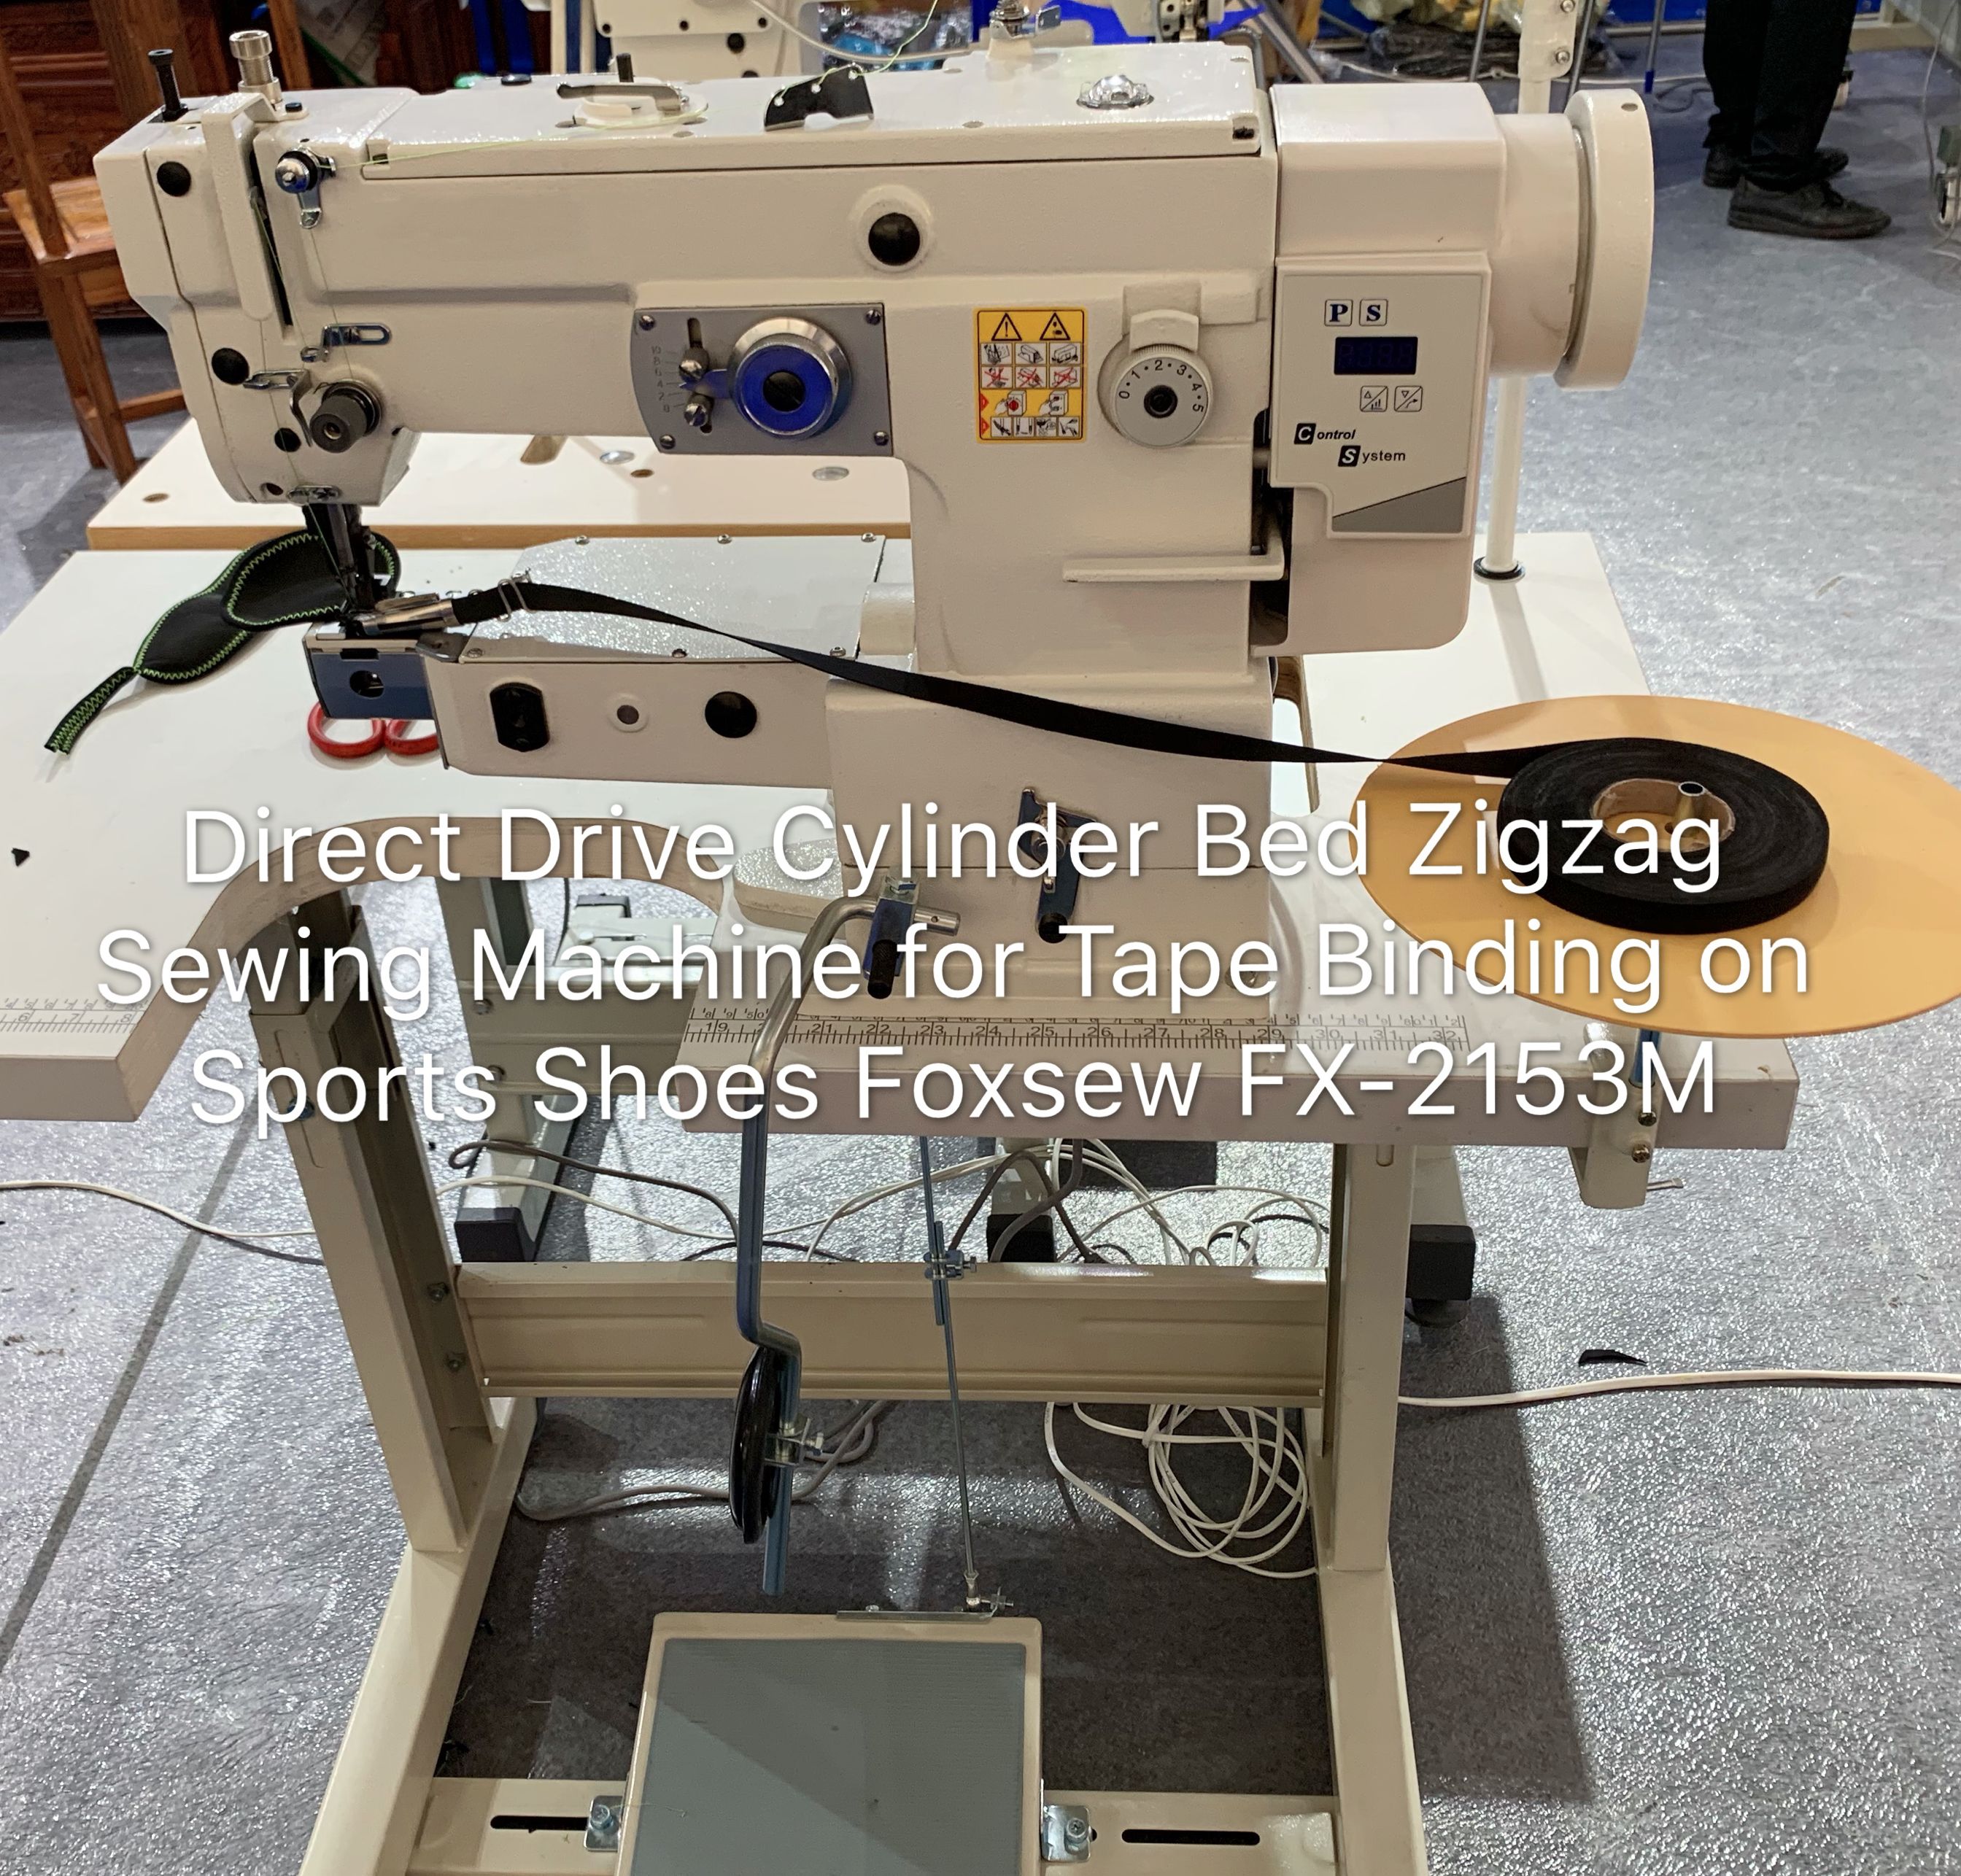 Direct Drive Cylinder Bed Zigzag Sewing Machine for Tape Binding on Sports Shoes Foxsew FX-2153M